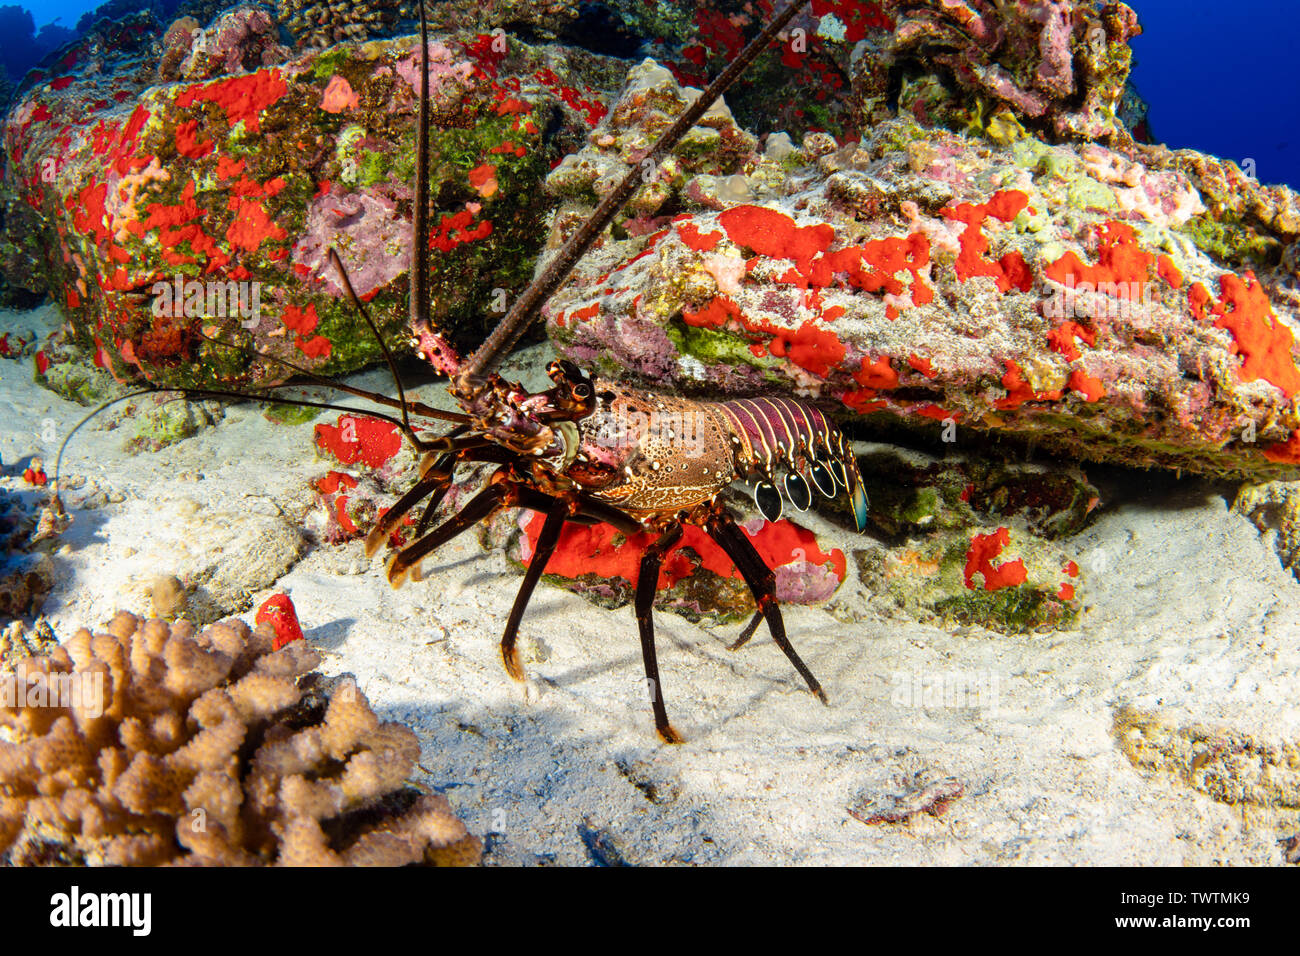 The banded spiny lobster, Panulirus marginatus, is an endemic species. Hawaii. Stock Photo